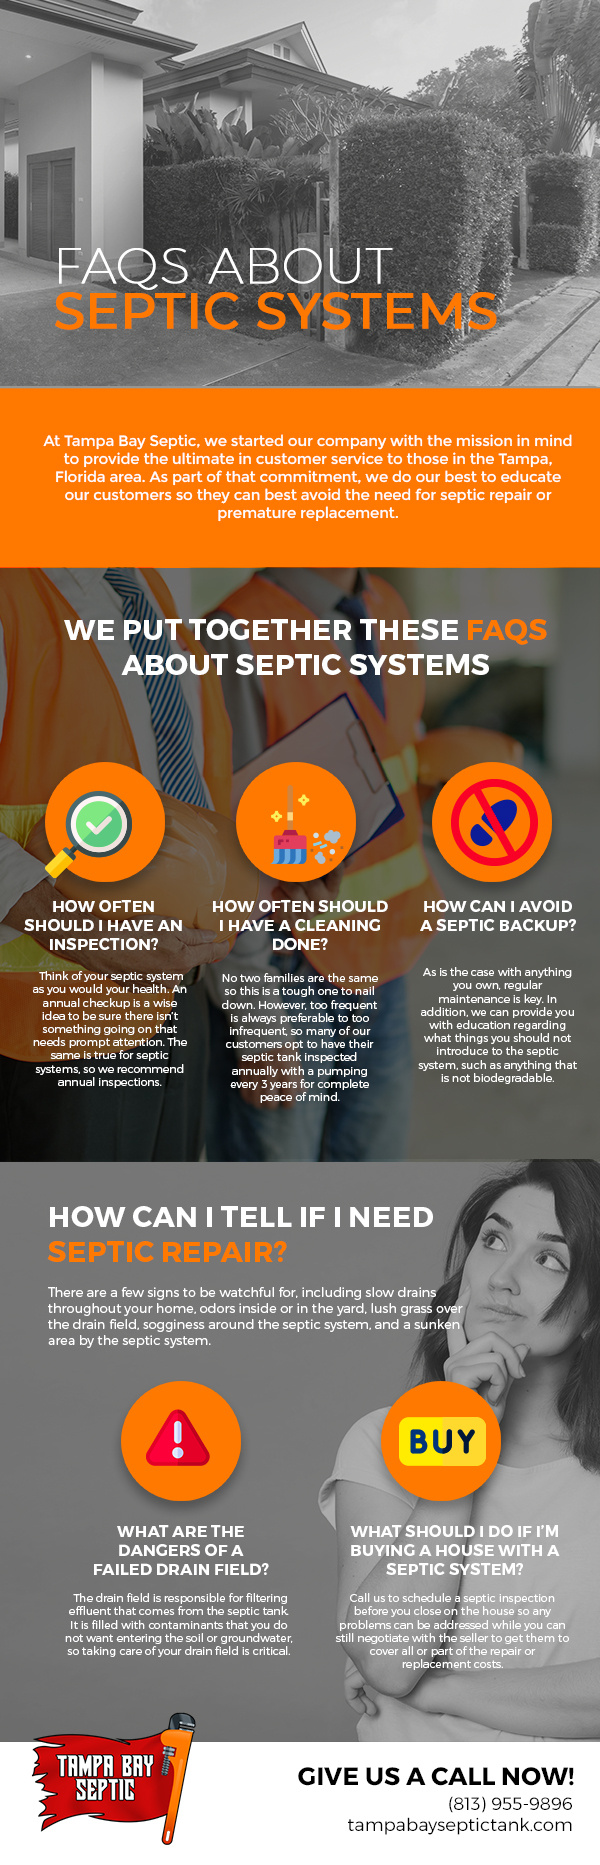 FAQs about Septic Systems [infographic]